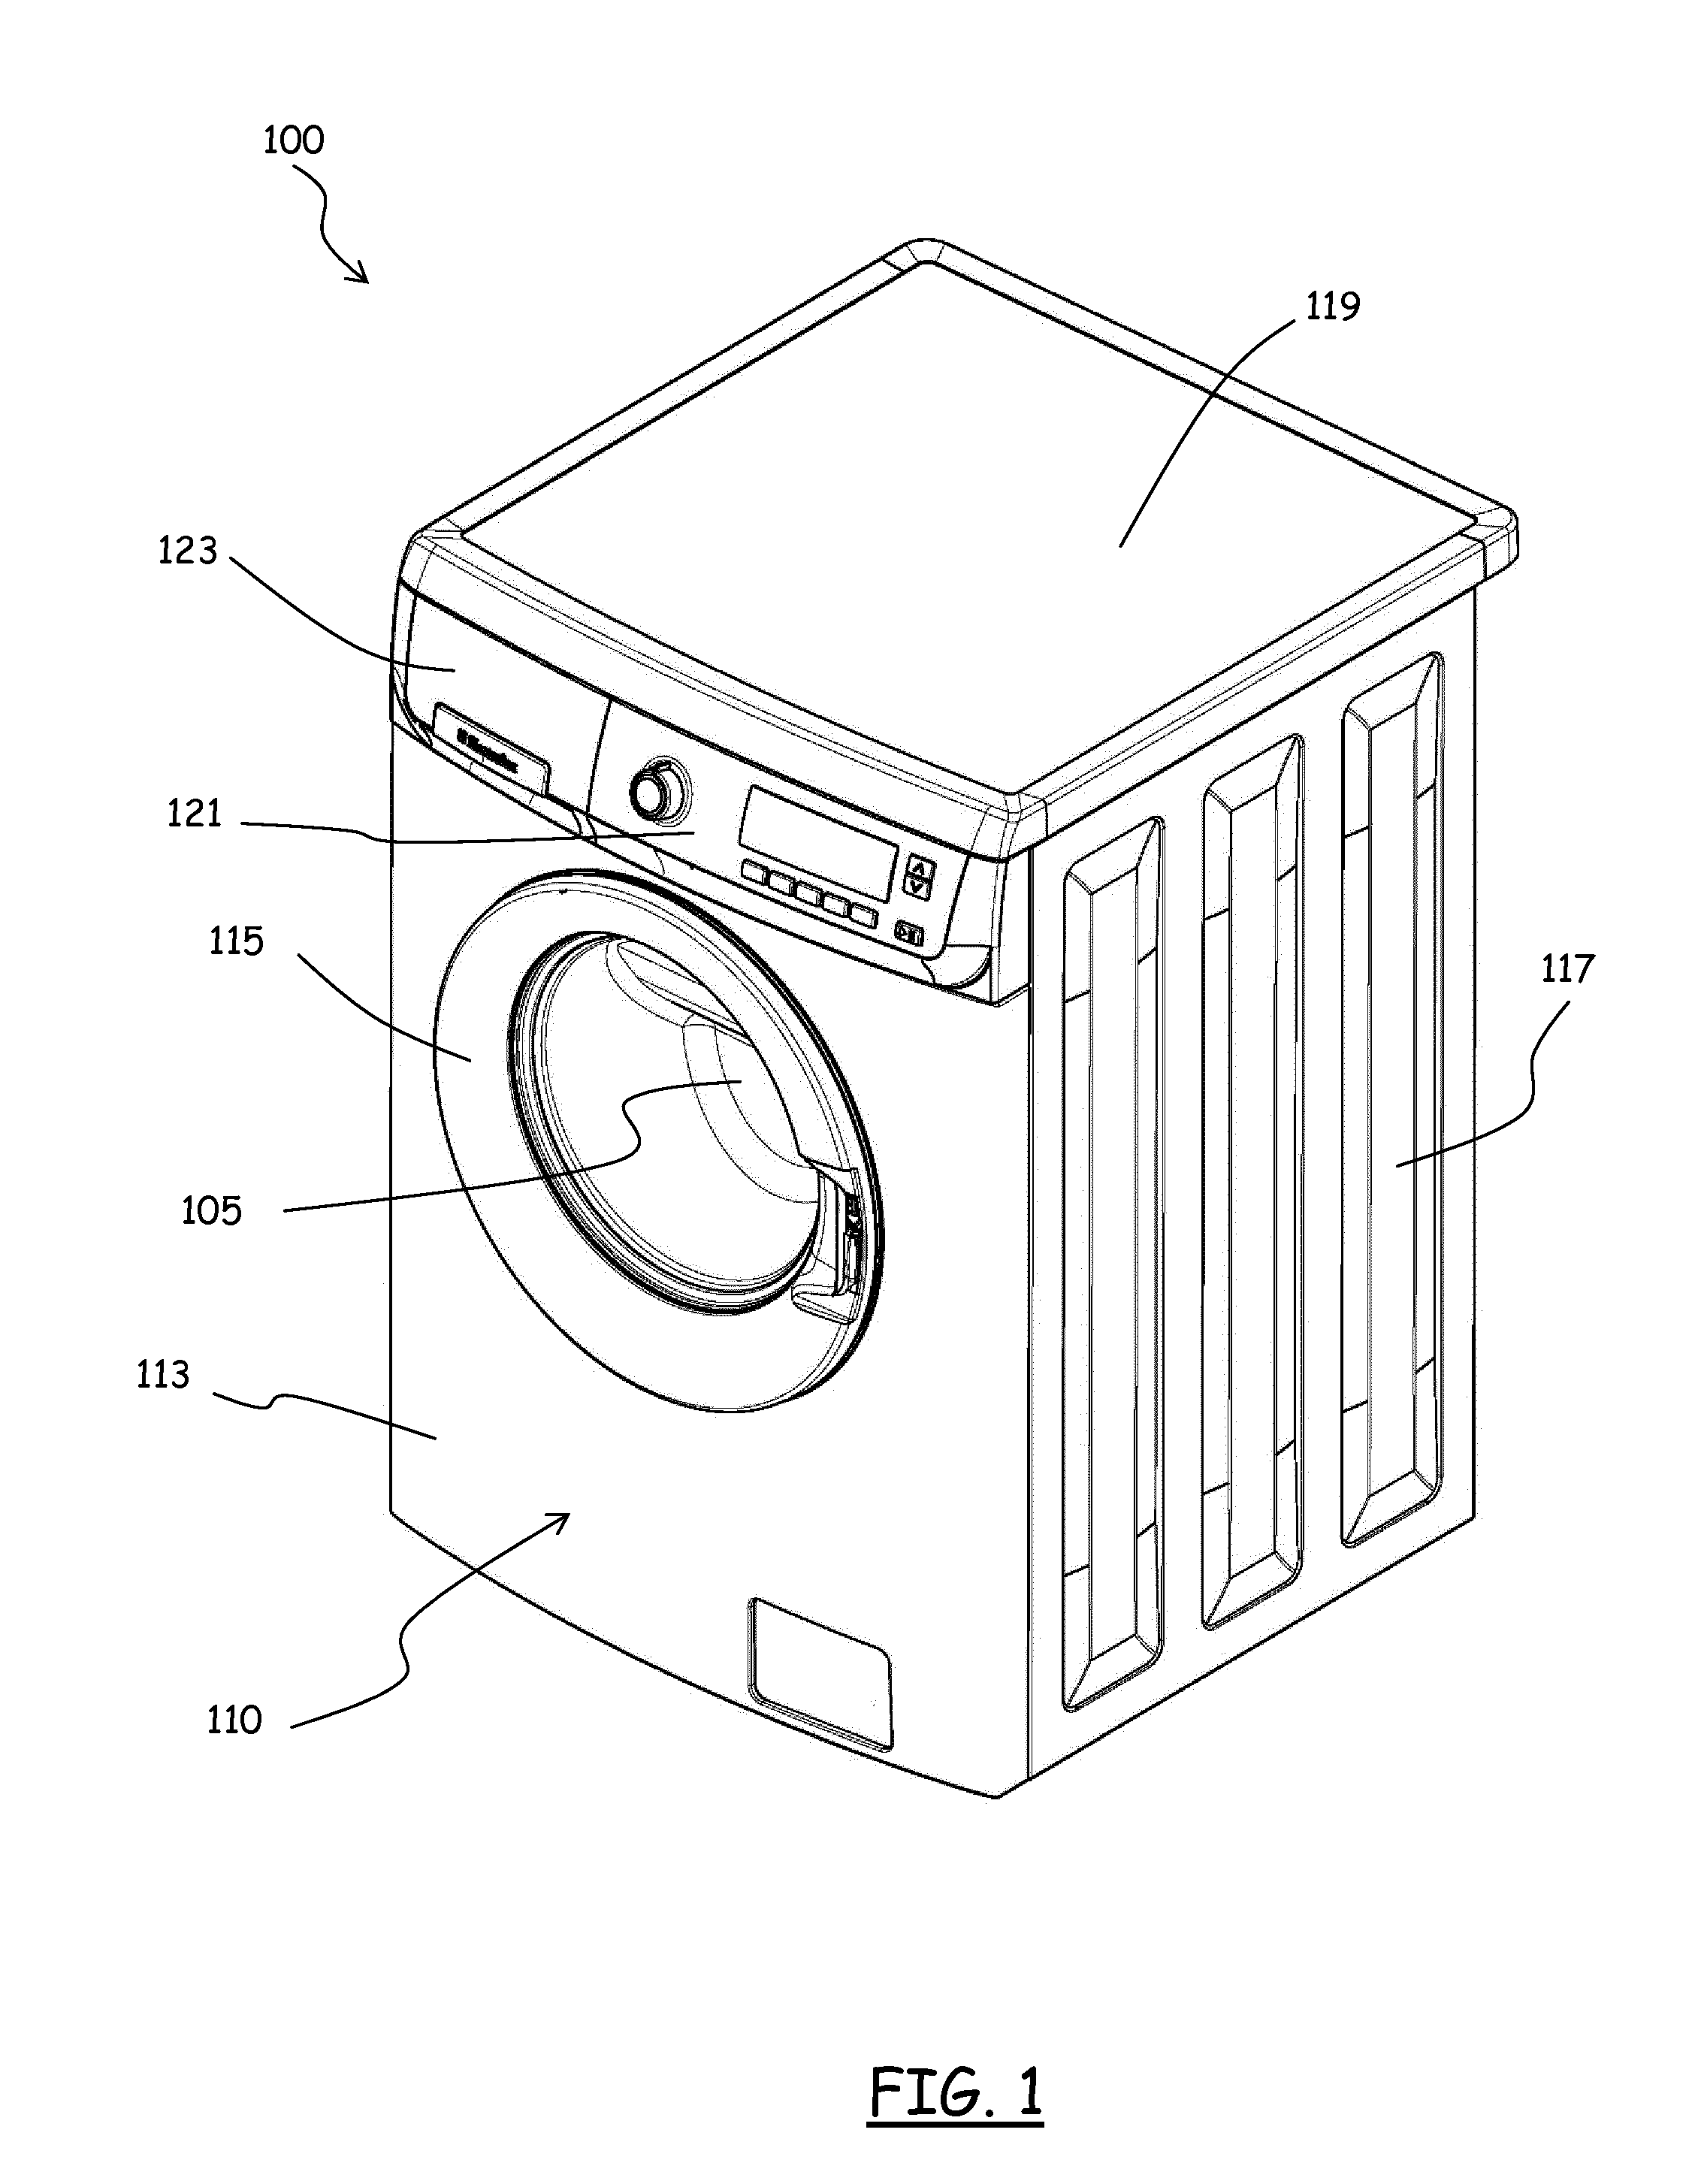 Appliance for Drying Laundry